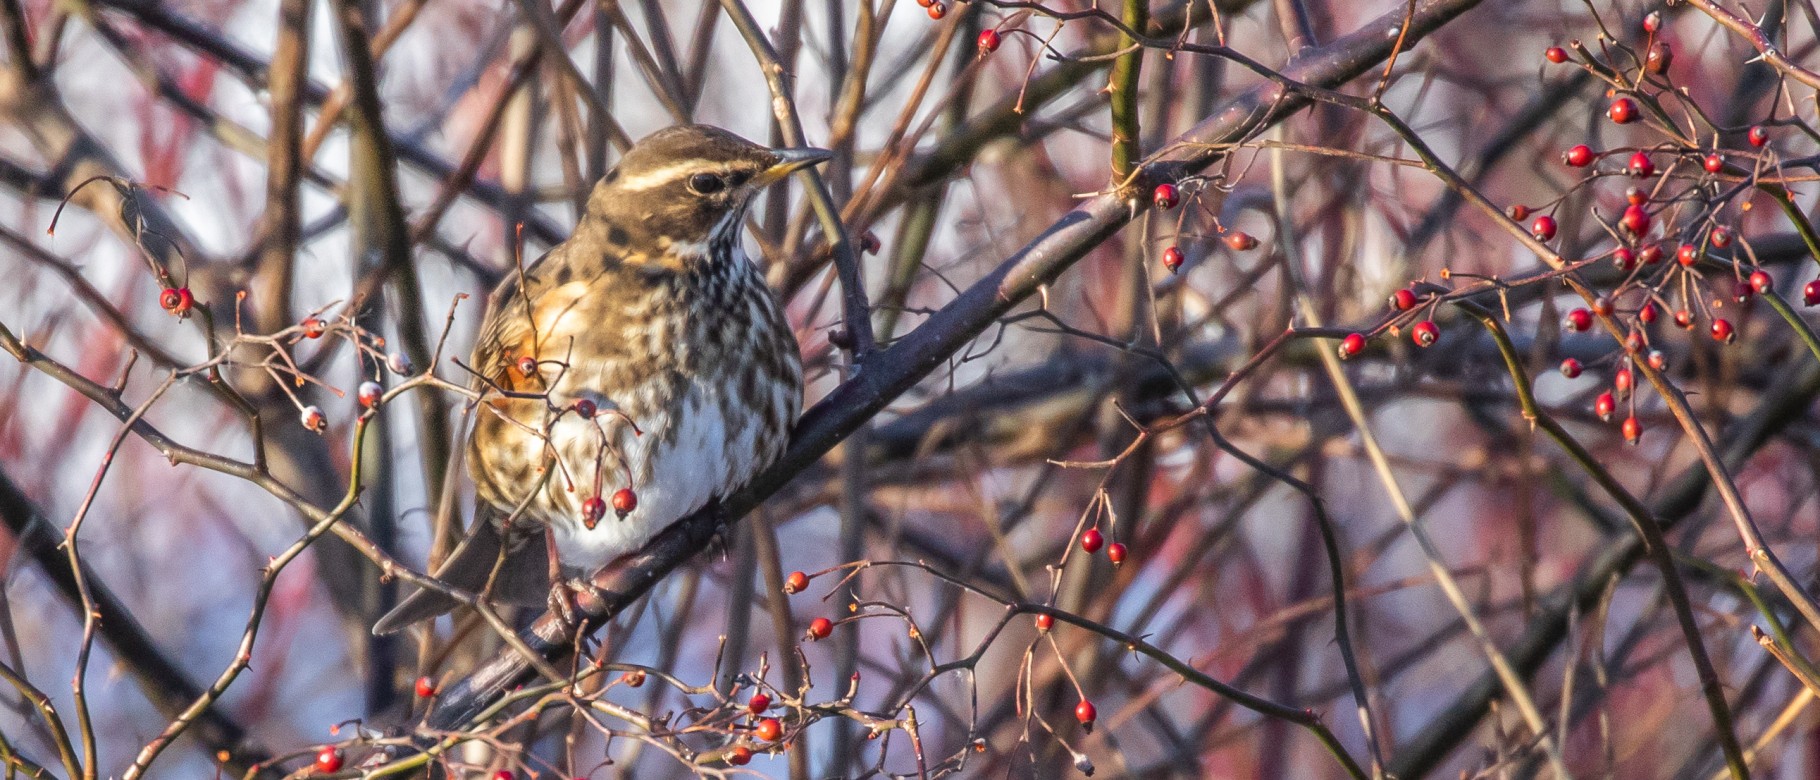 A rare Redwing bird seen in Capisic Pond Park in Portland, only the second such sighting of a bird of this kind in Maine